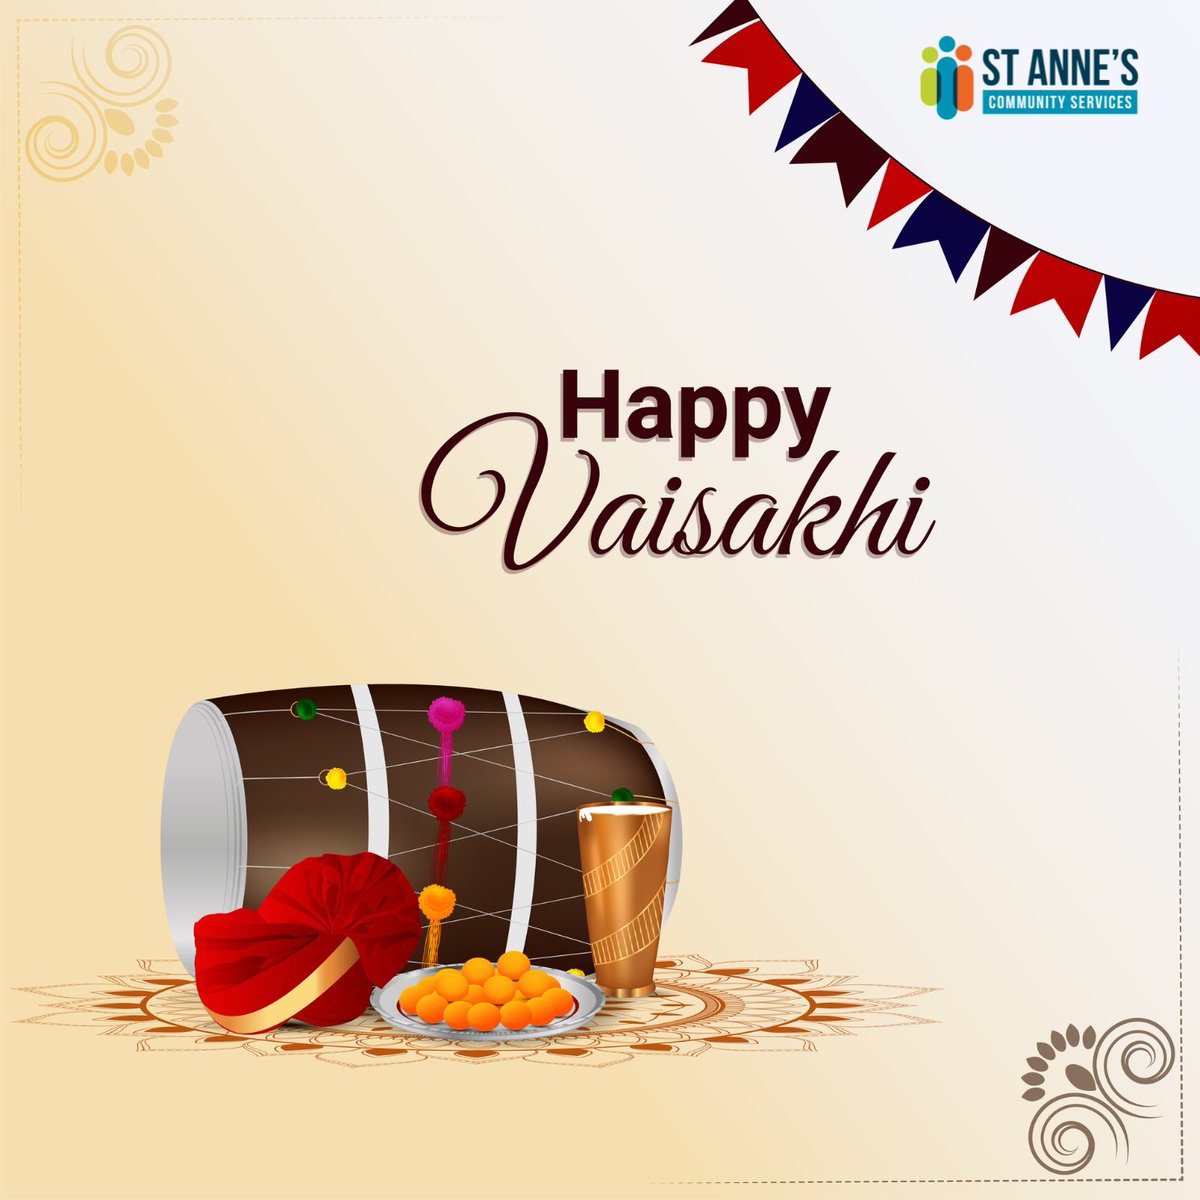 Happy Vaisakhi to all celebrating! May this special day bring joy, prosperity, and the blessings of new beginnings. 🌾🌞 #Vaisakhi #Celebration #charity